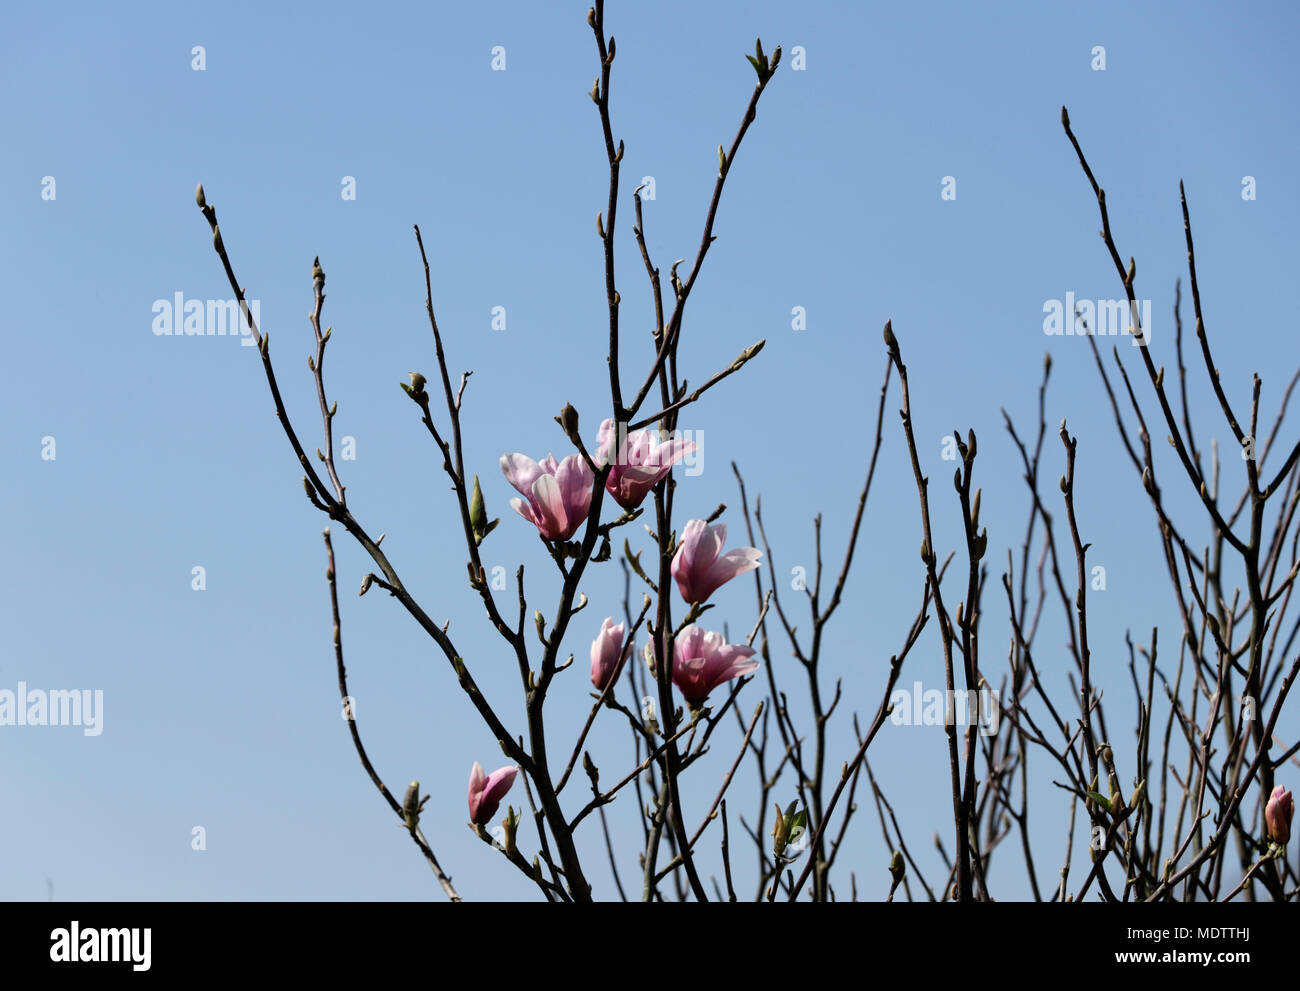 Magnolia tree with pink flowers Stock Photo